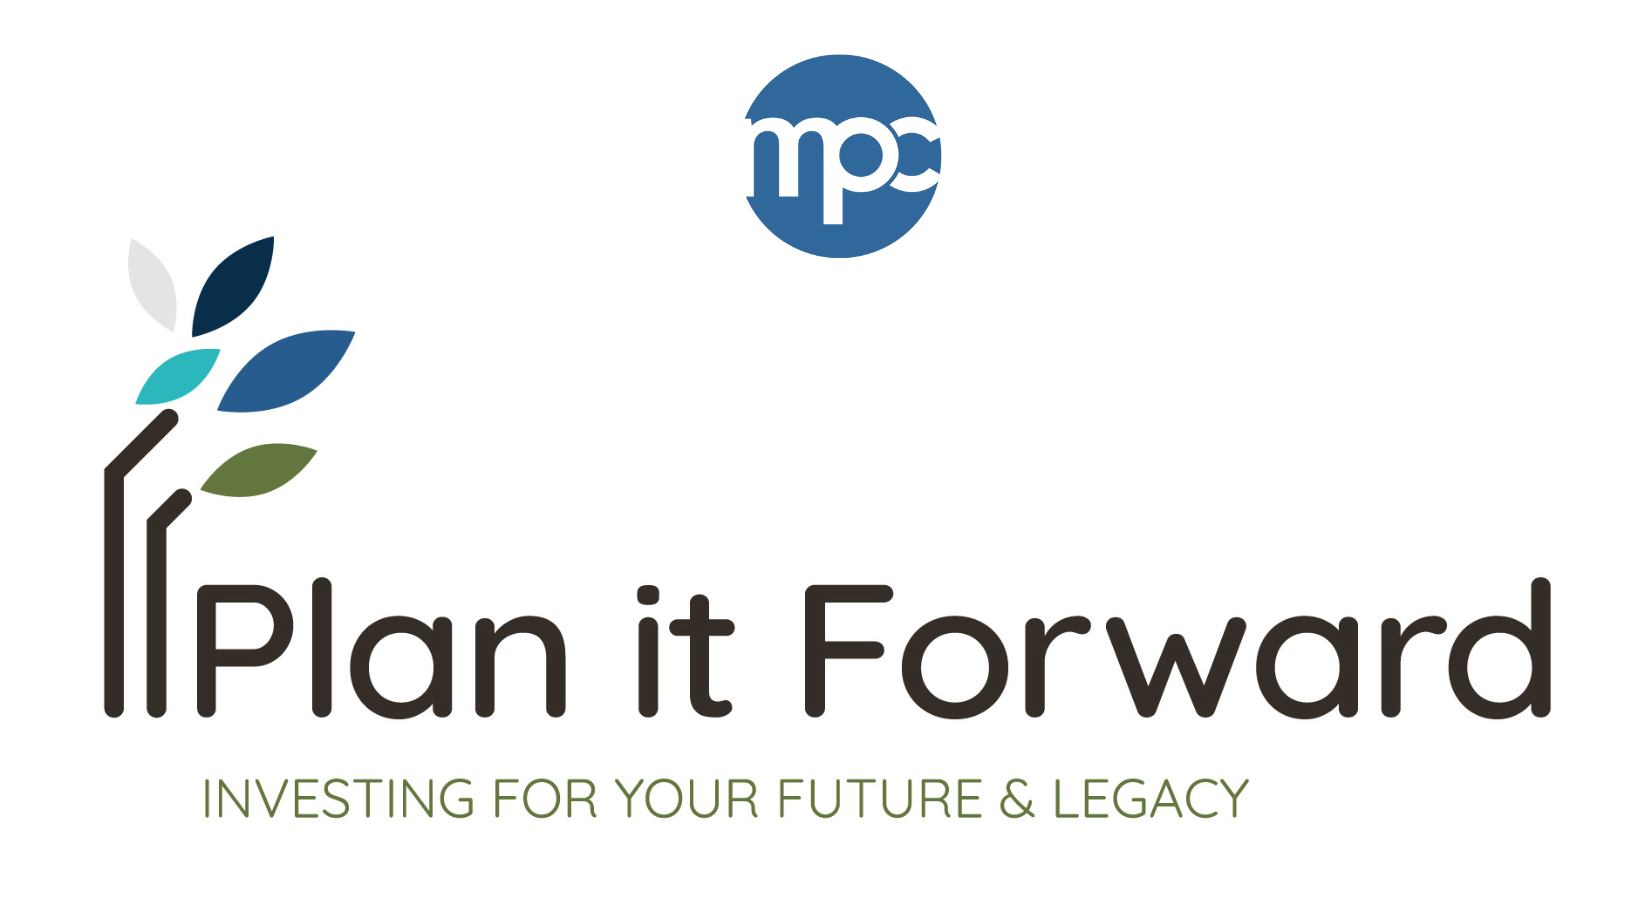 Plan it Forward

A unique event on April 25th aimed at helping you invest in your future and leave a meaningful legacy. 
